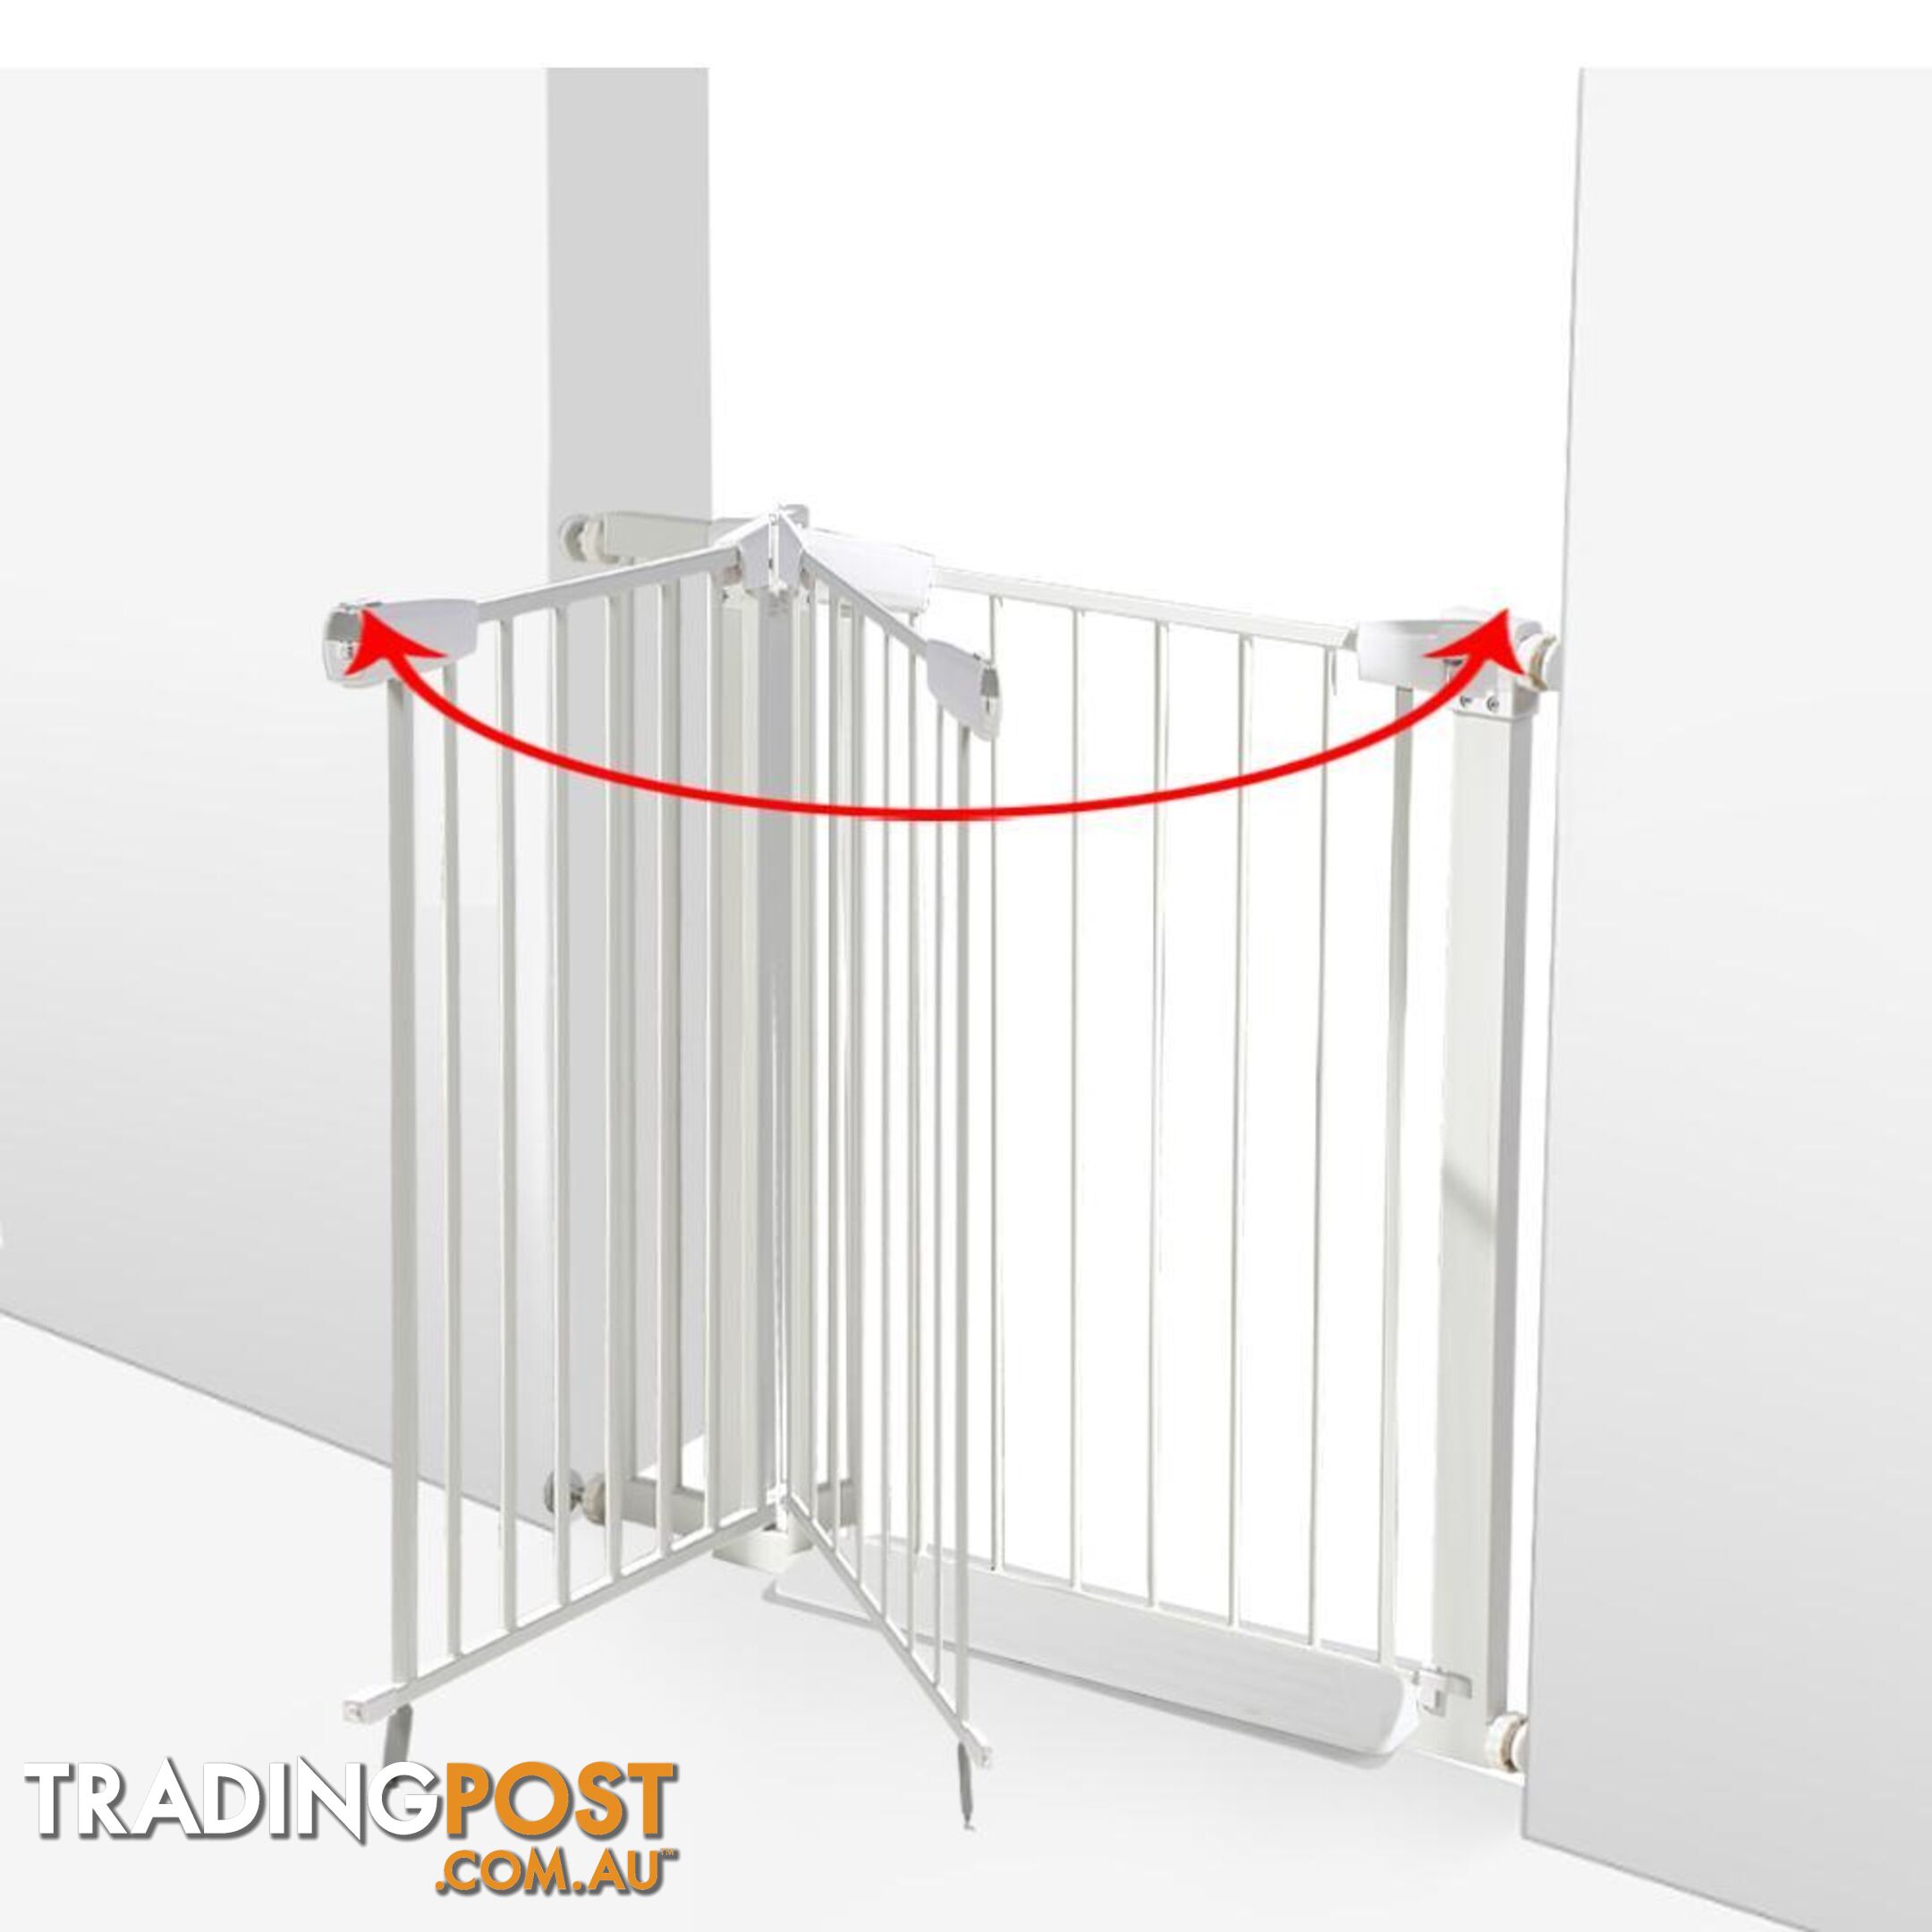 Baby Kids Pet Safety Security Gate Stair Barrier Doors Extension Panels 45Cm Wh - Unbranded - 787976591663